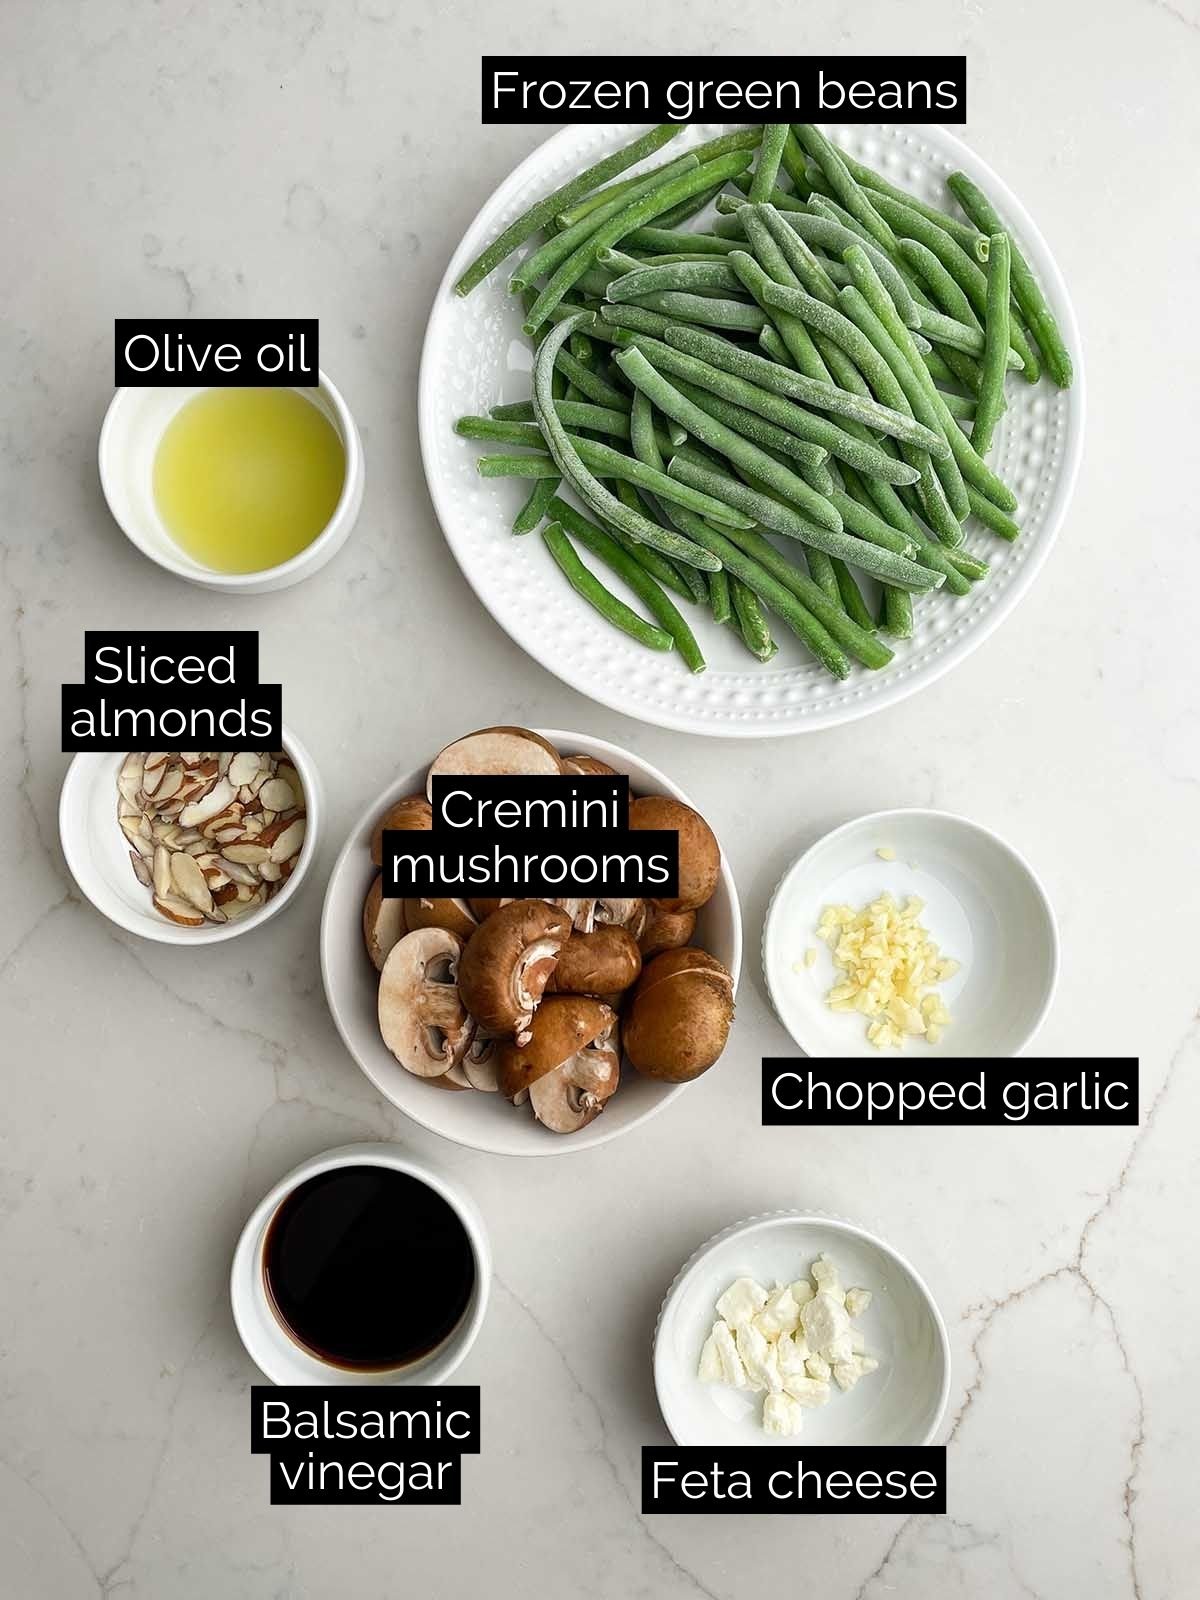 roasted green beans and mushrooms ingredients